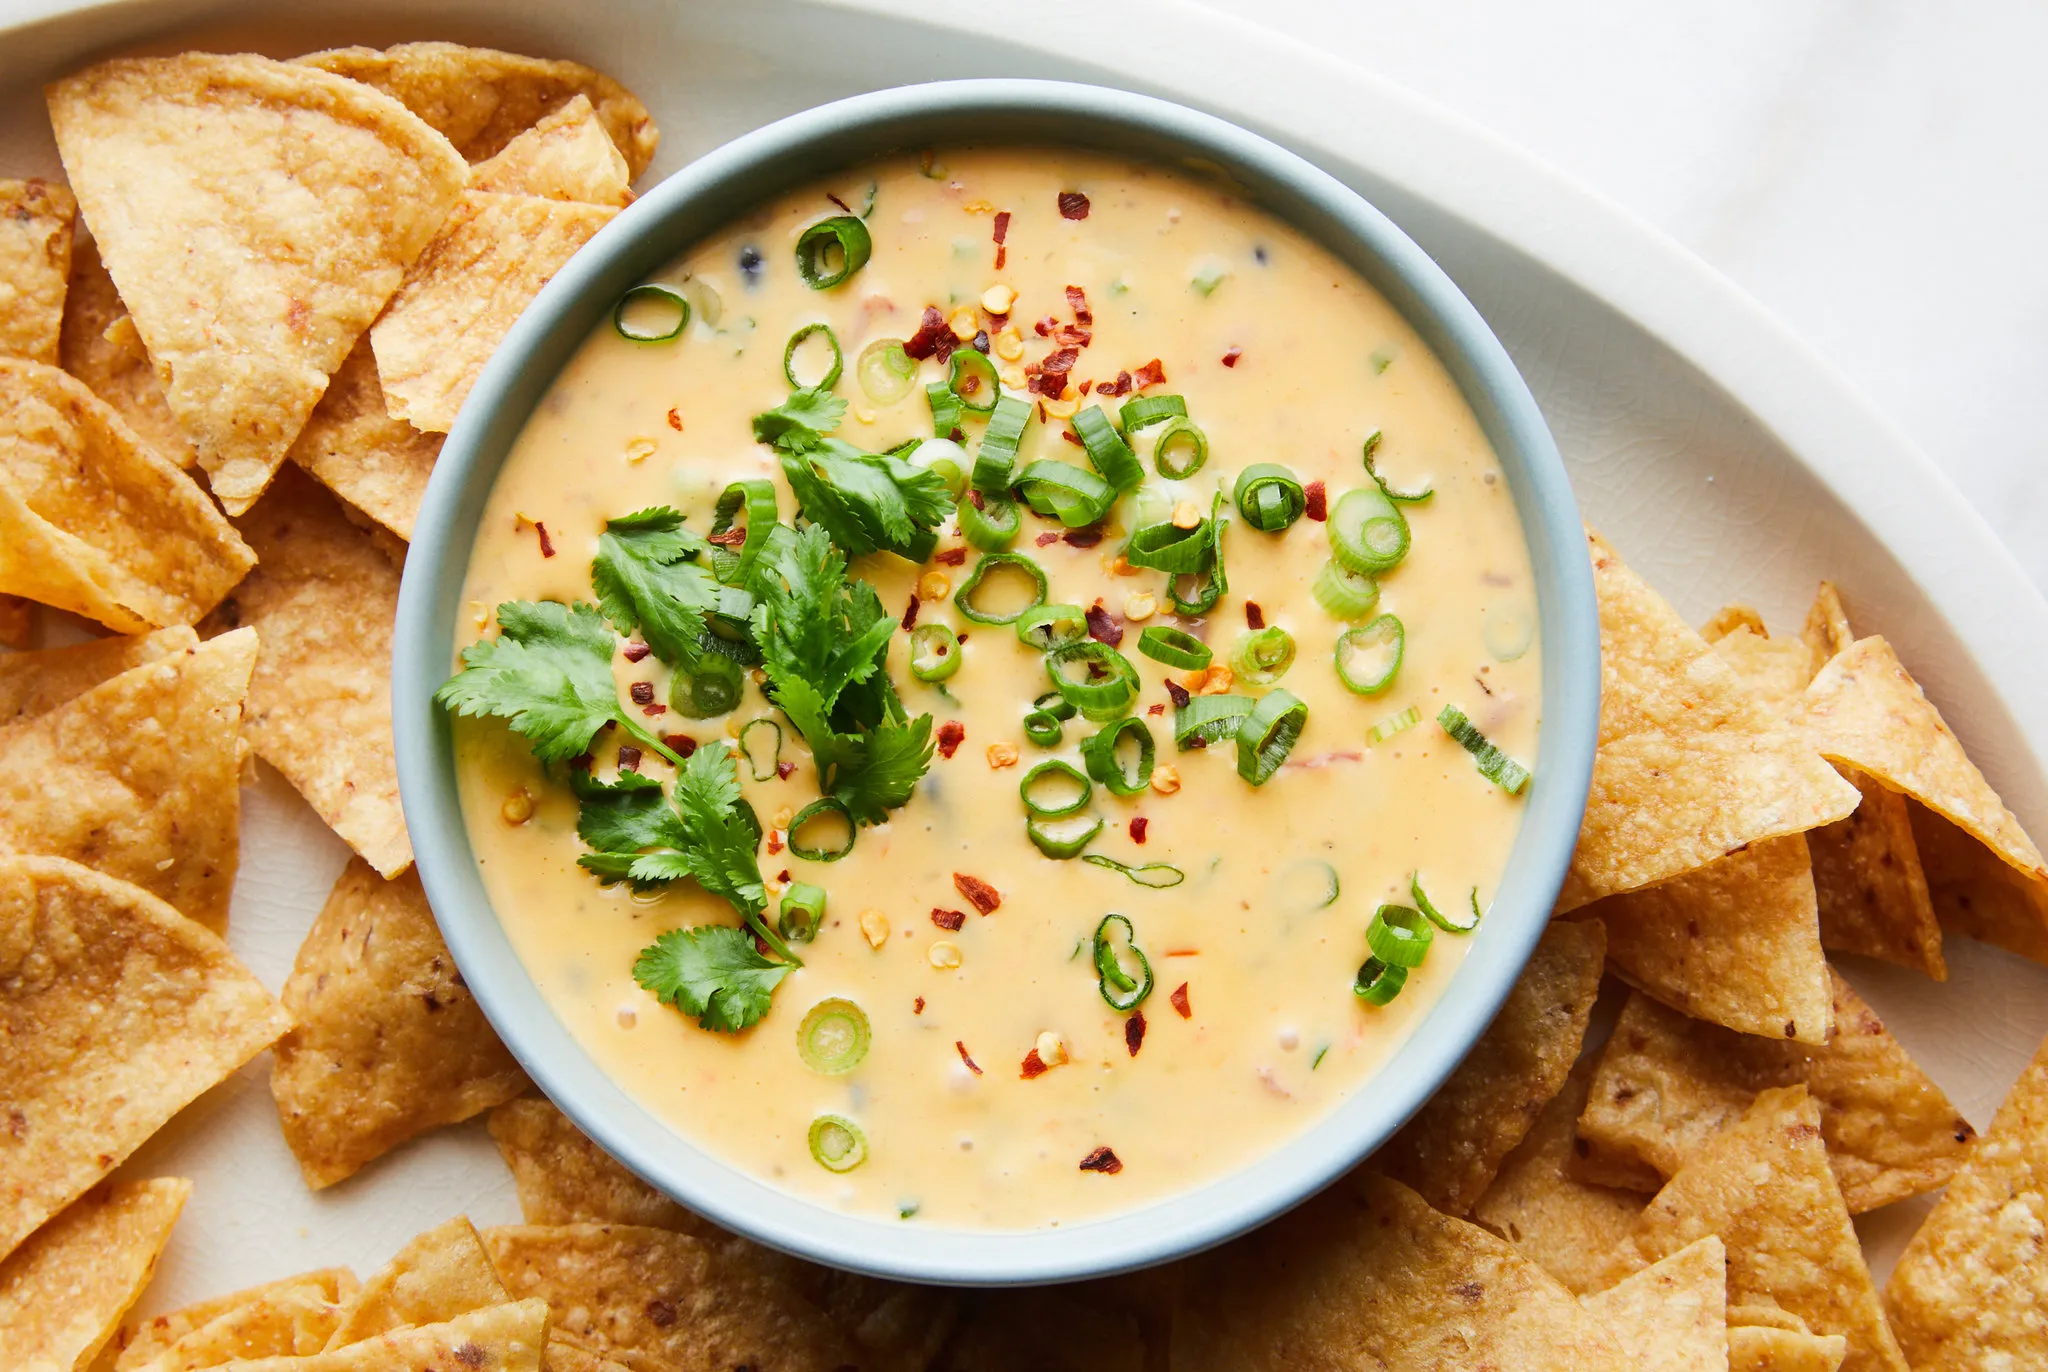 Is Queso Goat Cheese?